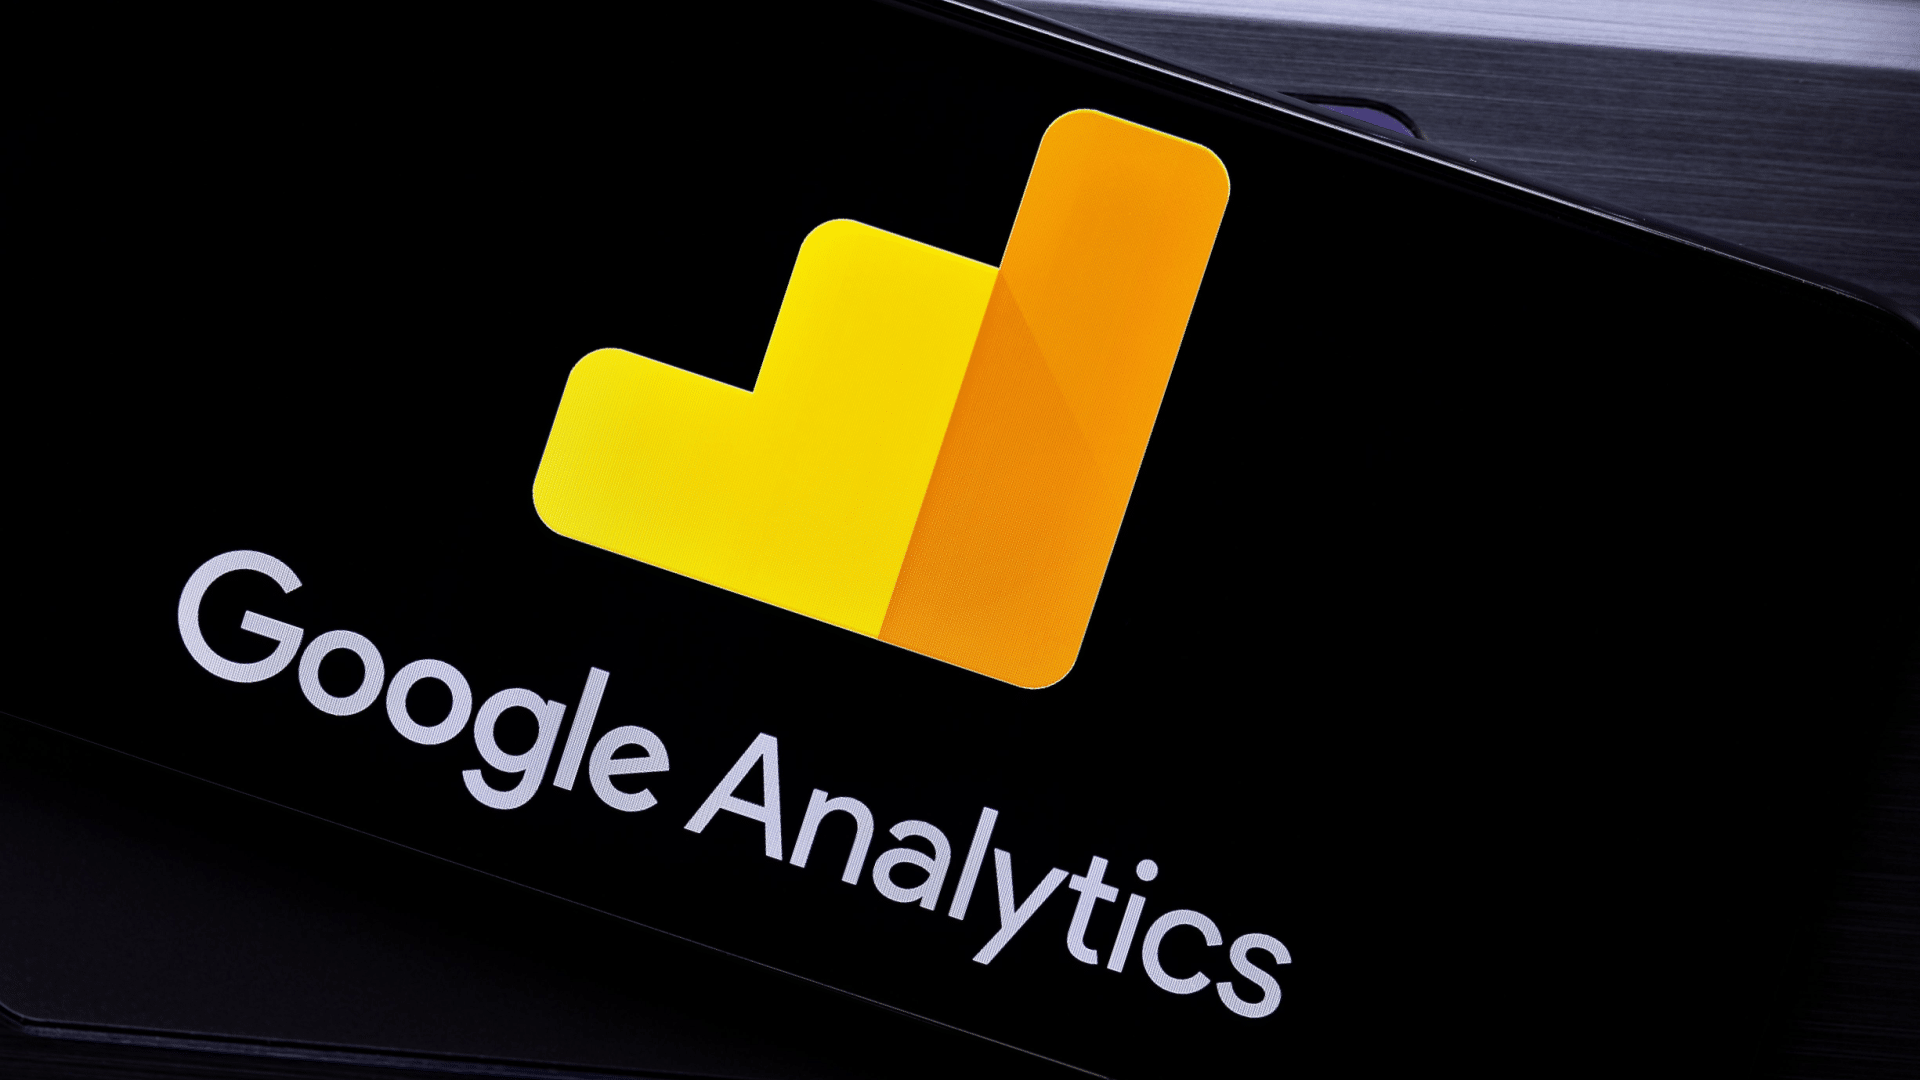 #Reminder – Google is turning off all Universal Analytics services and APIs